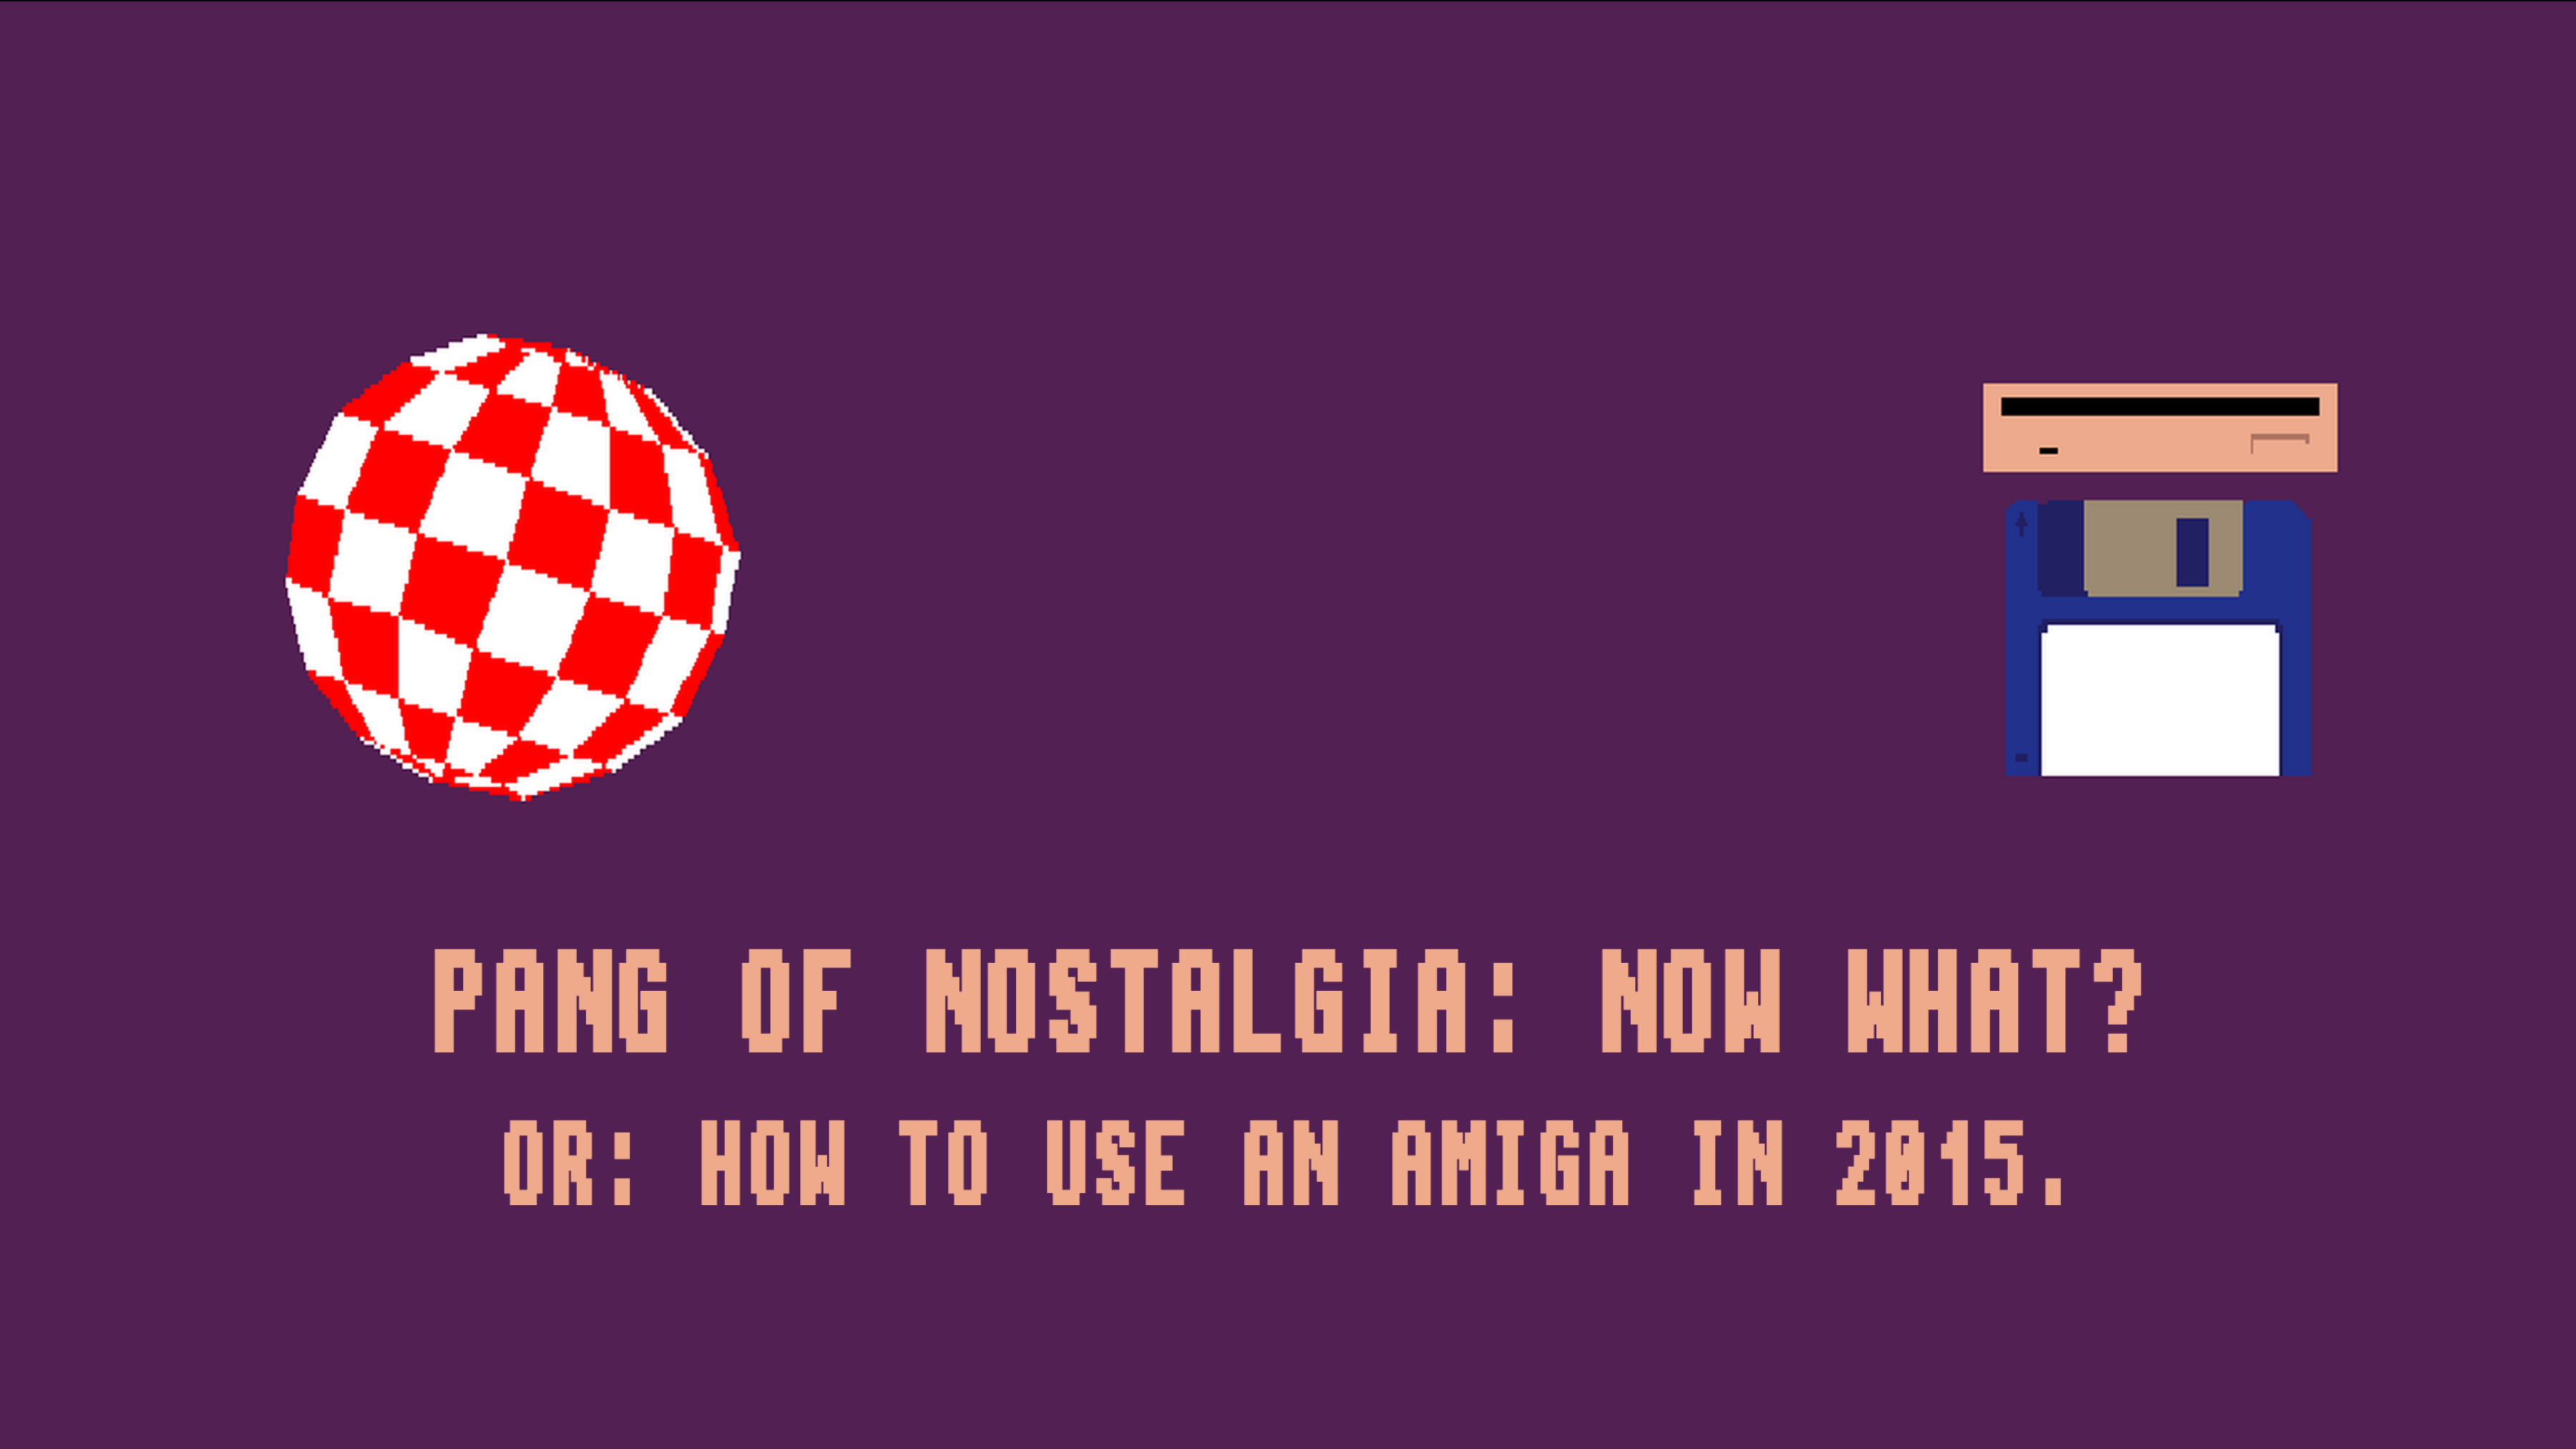 How to use an Amiga in 2015